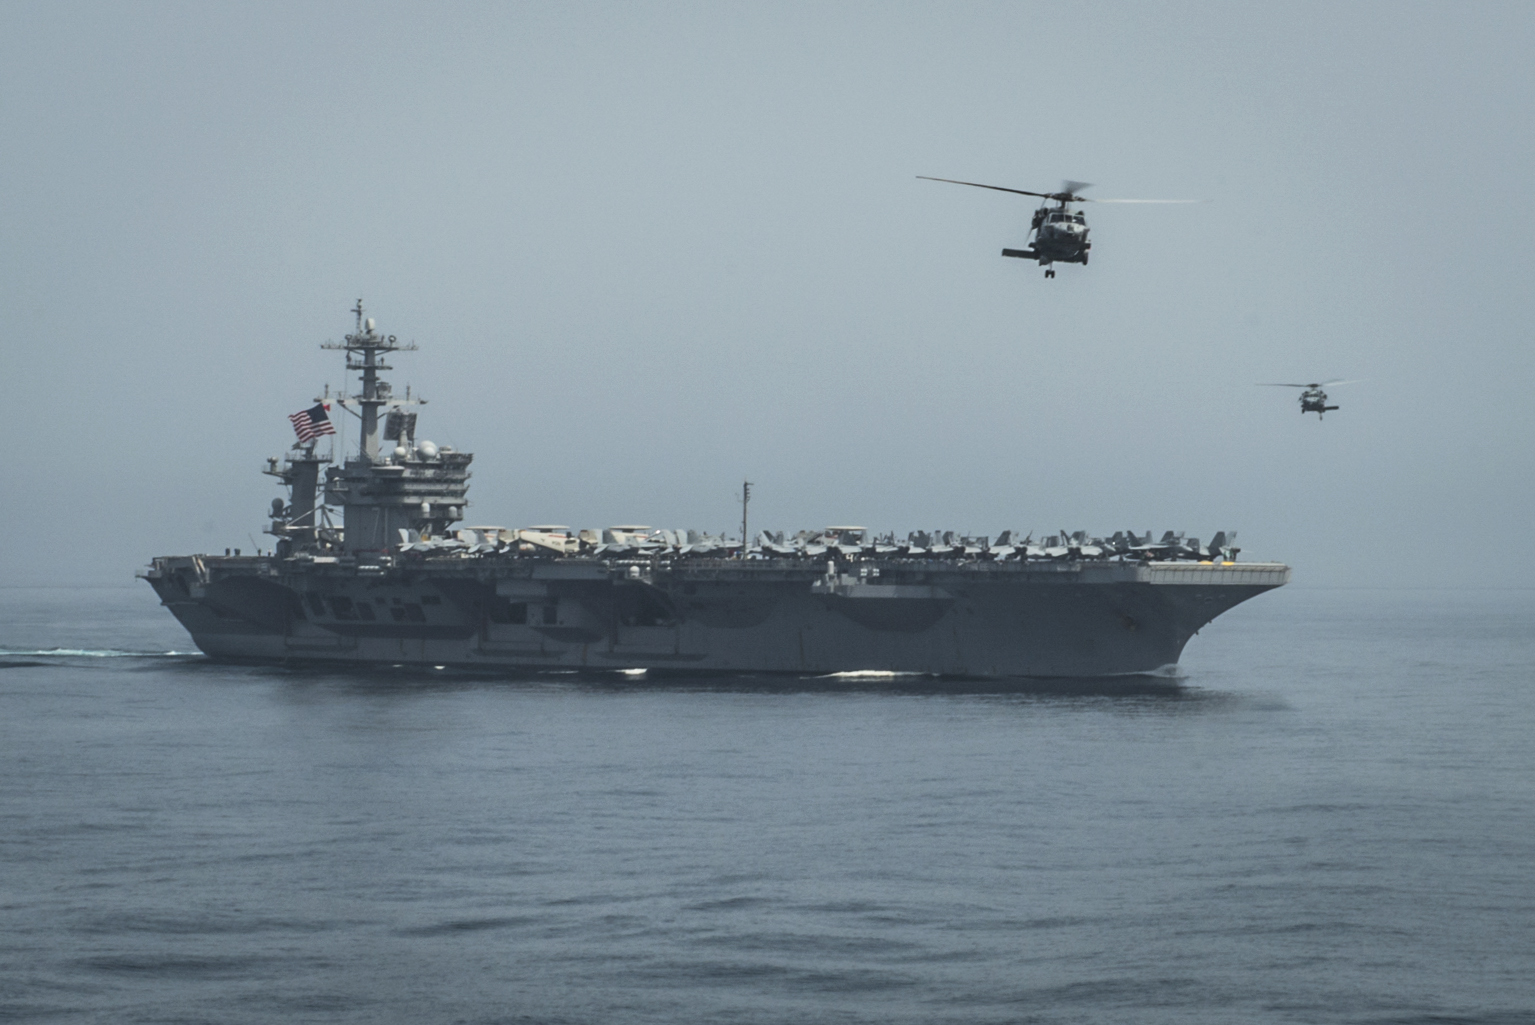 Helicopters fly from the aircraft carrier USS Theodore Roosevelt (CVN-71) on April 13, 2015. US Navy Photo